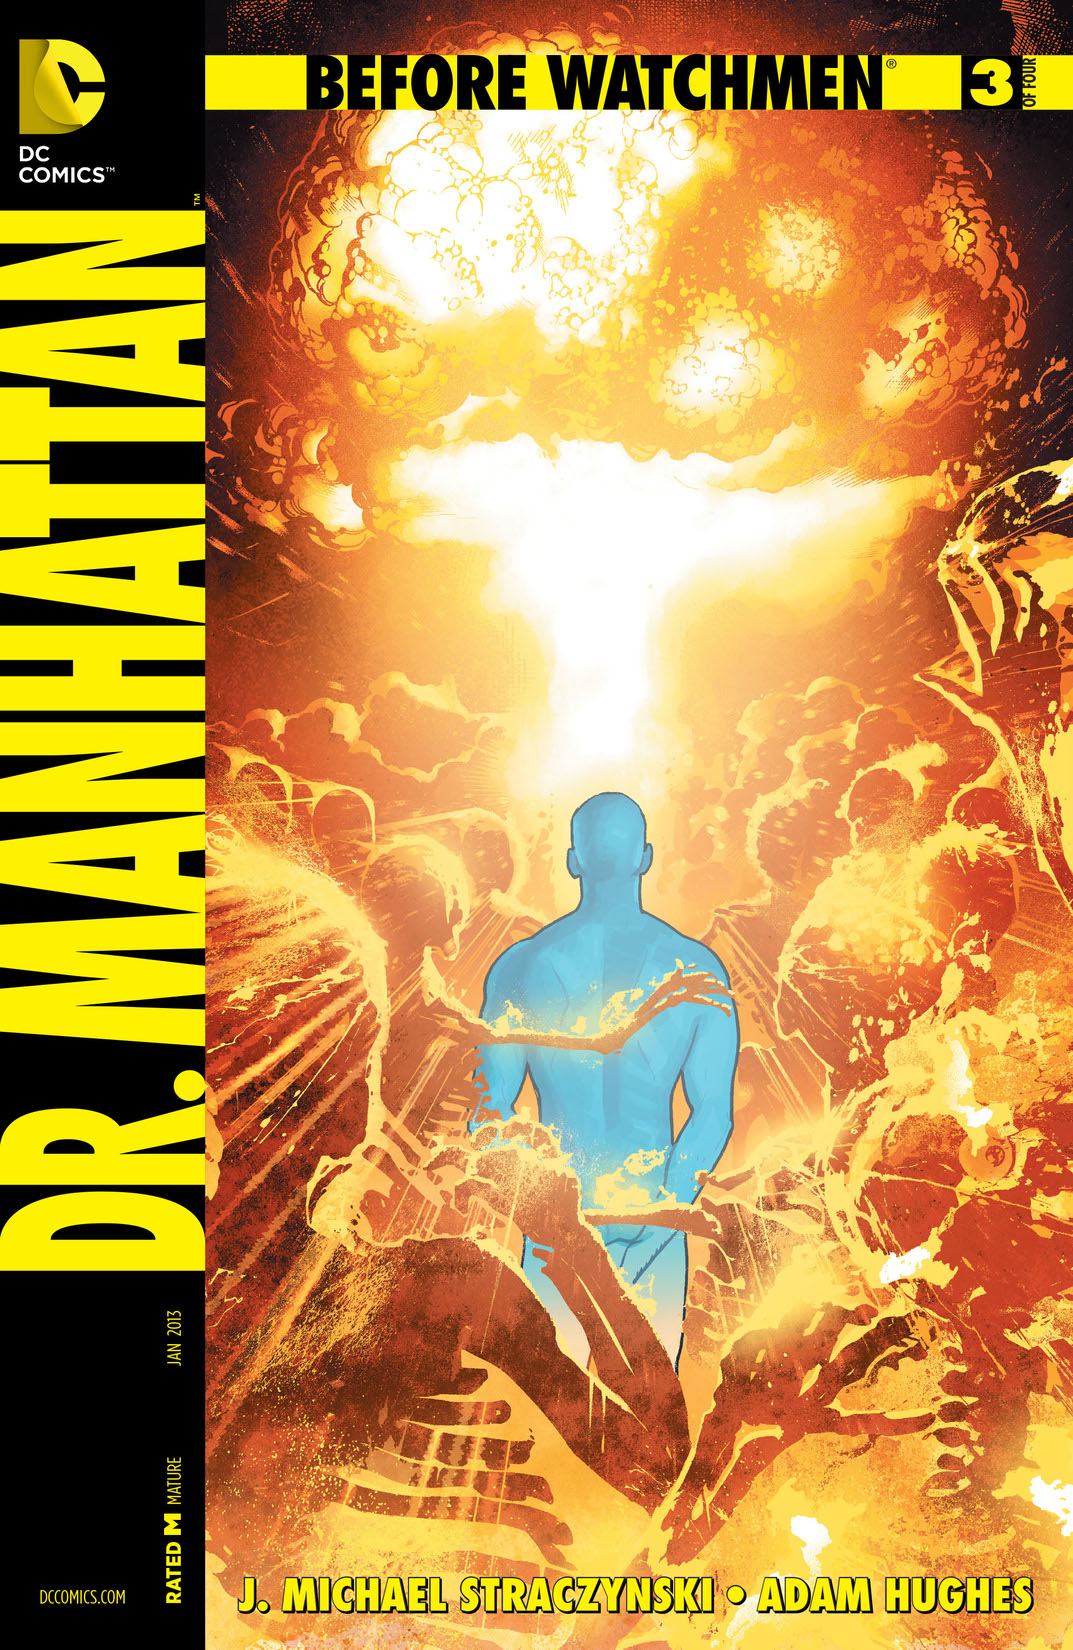 Before Watchmen: Dr. Manhattan #3 preview images